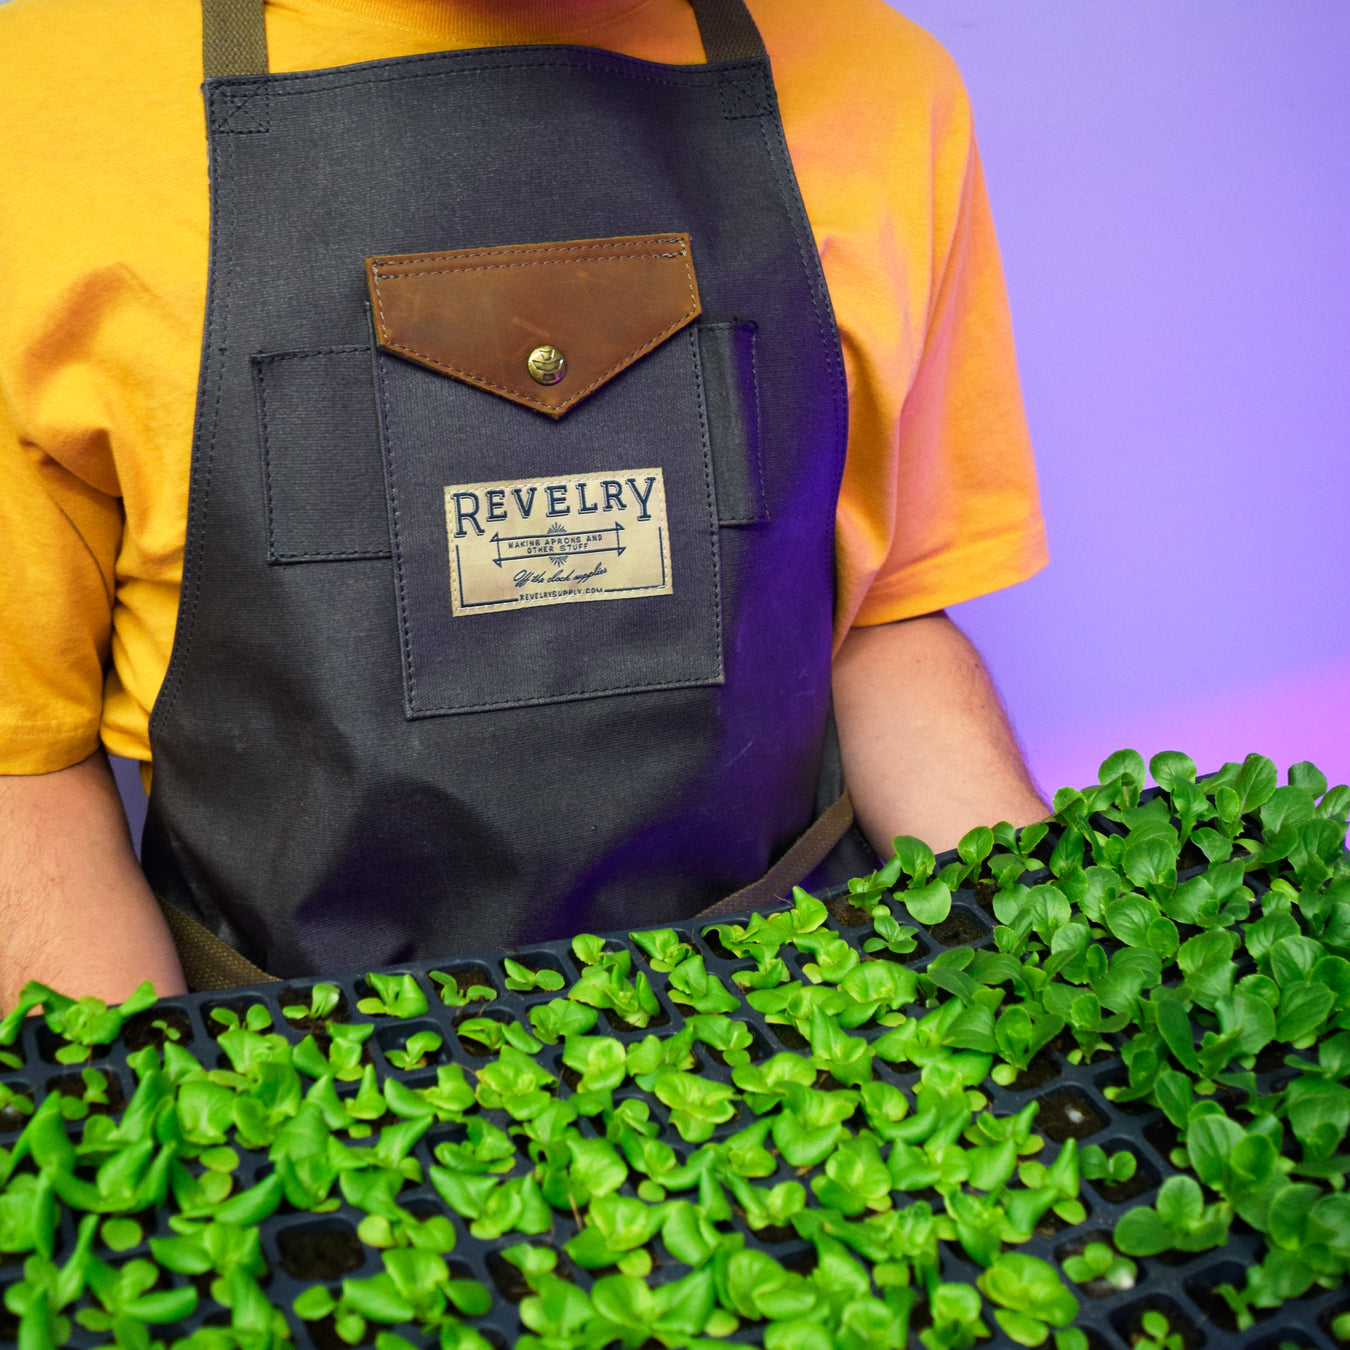 Man in a revelry supply waxed canvas apron holding a tray of seedlings